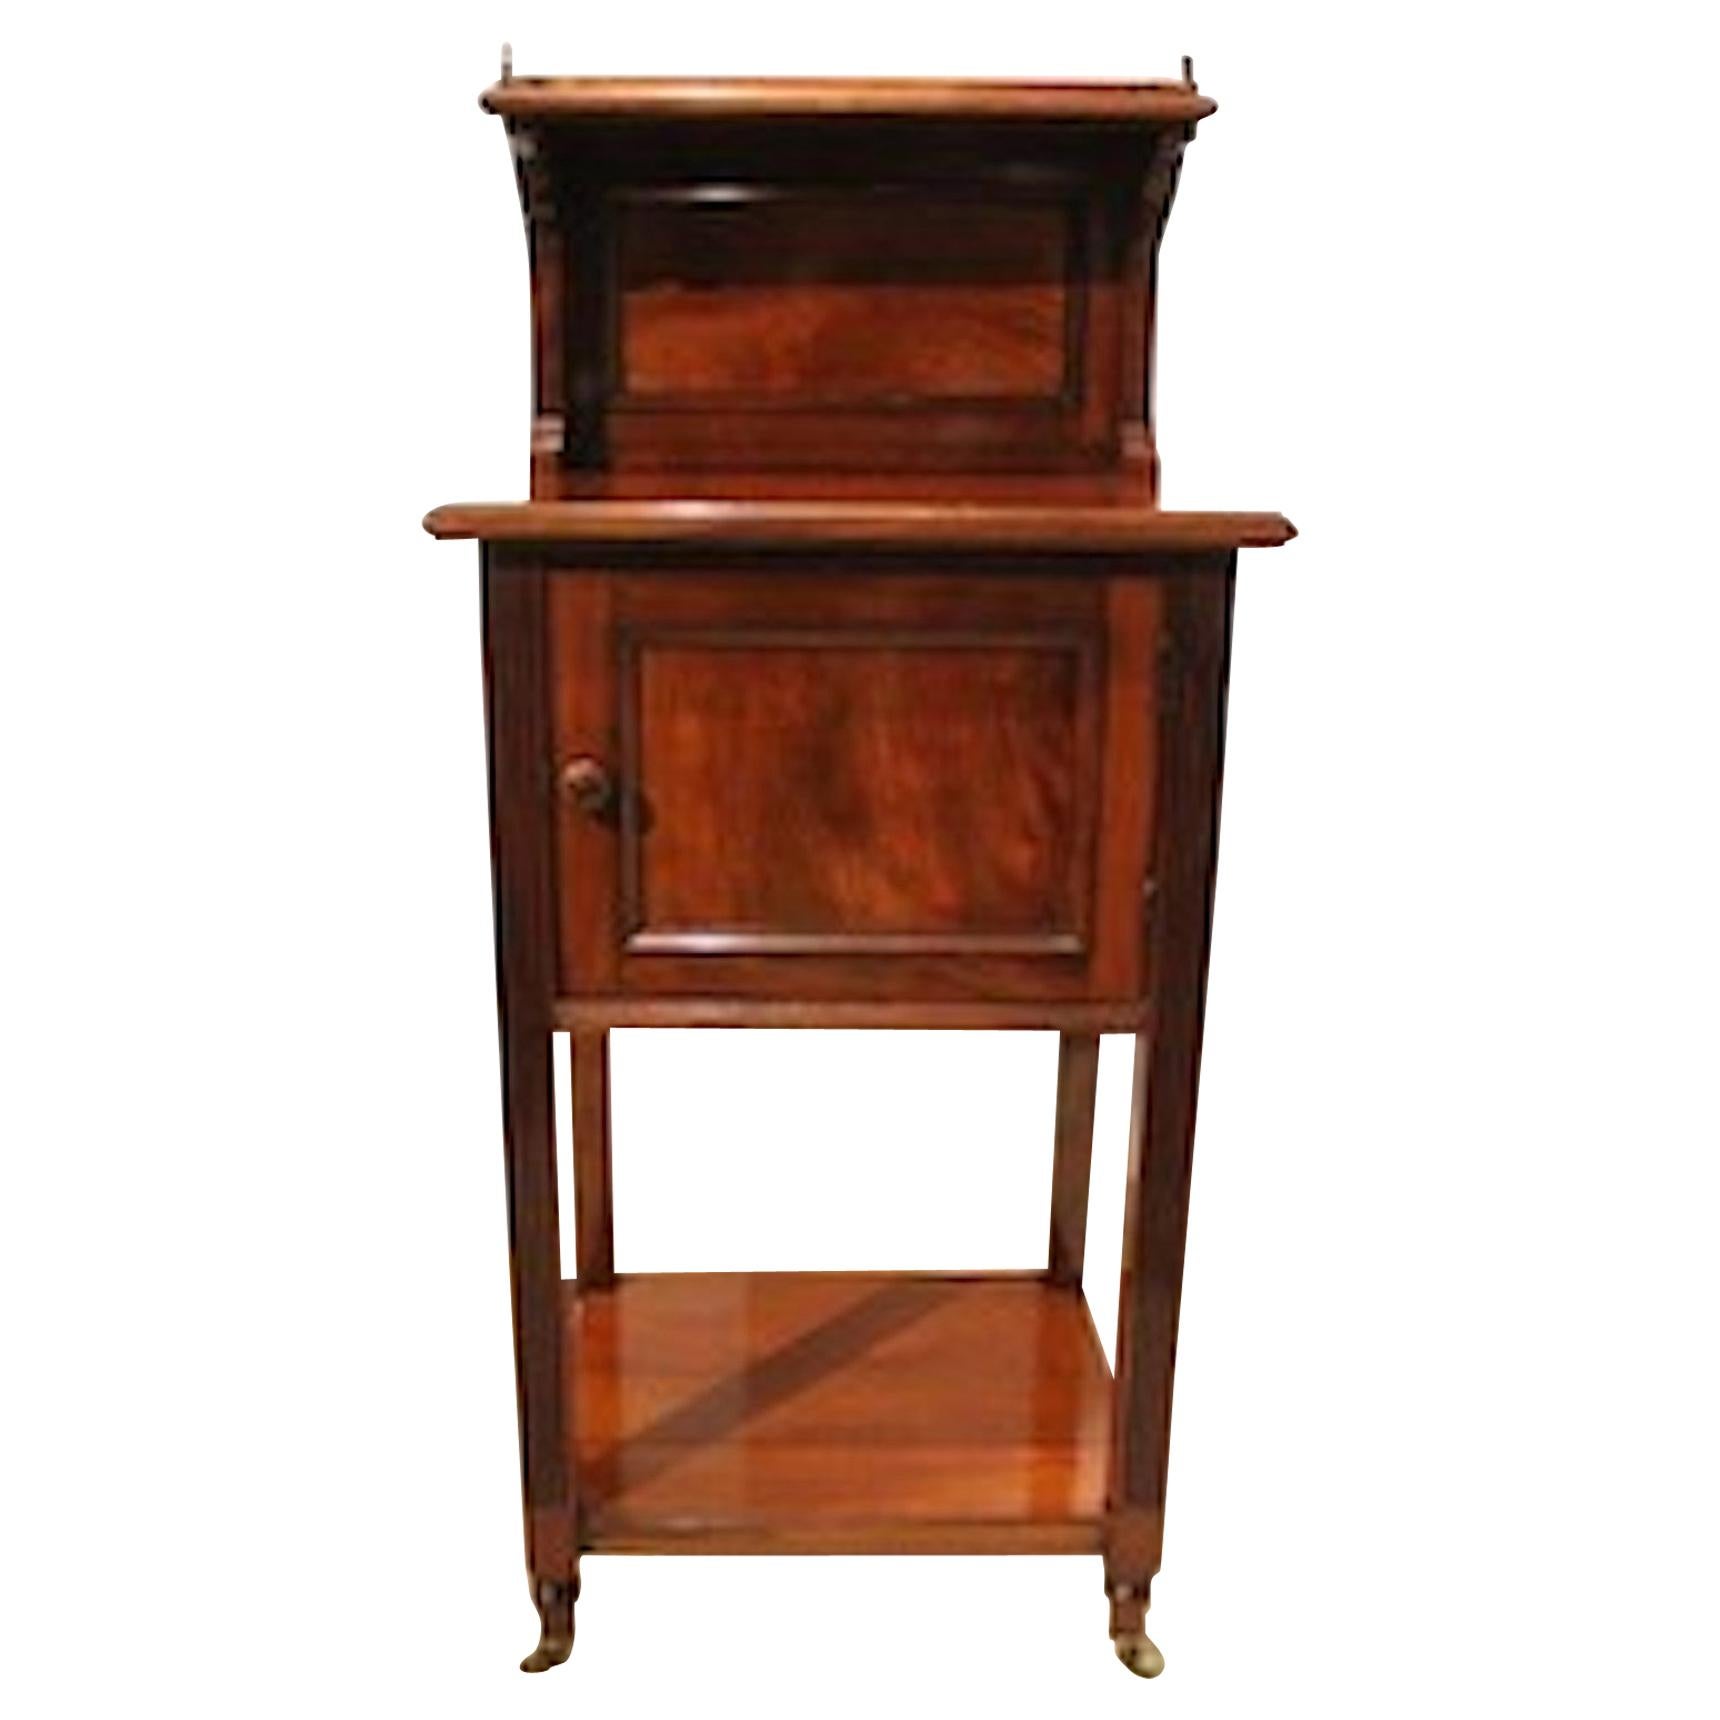 Victorian Period Mahogany Antique Bedside Cabinet by Holland & Sons For Sale